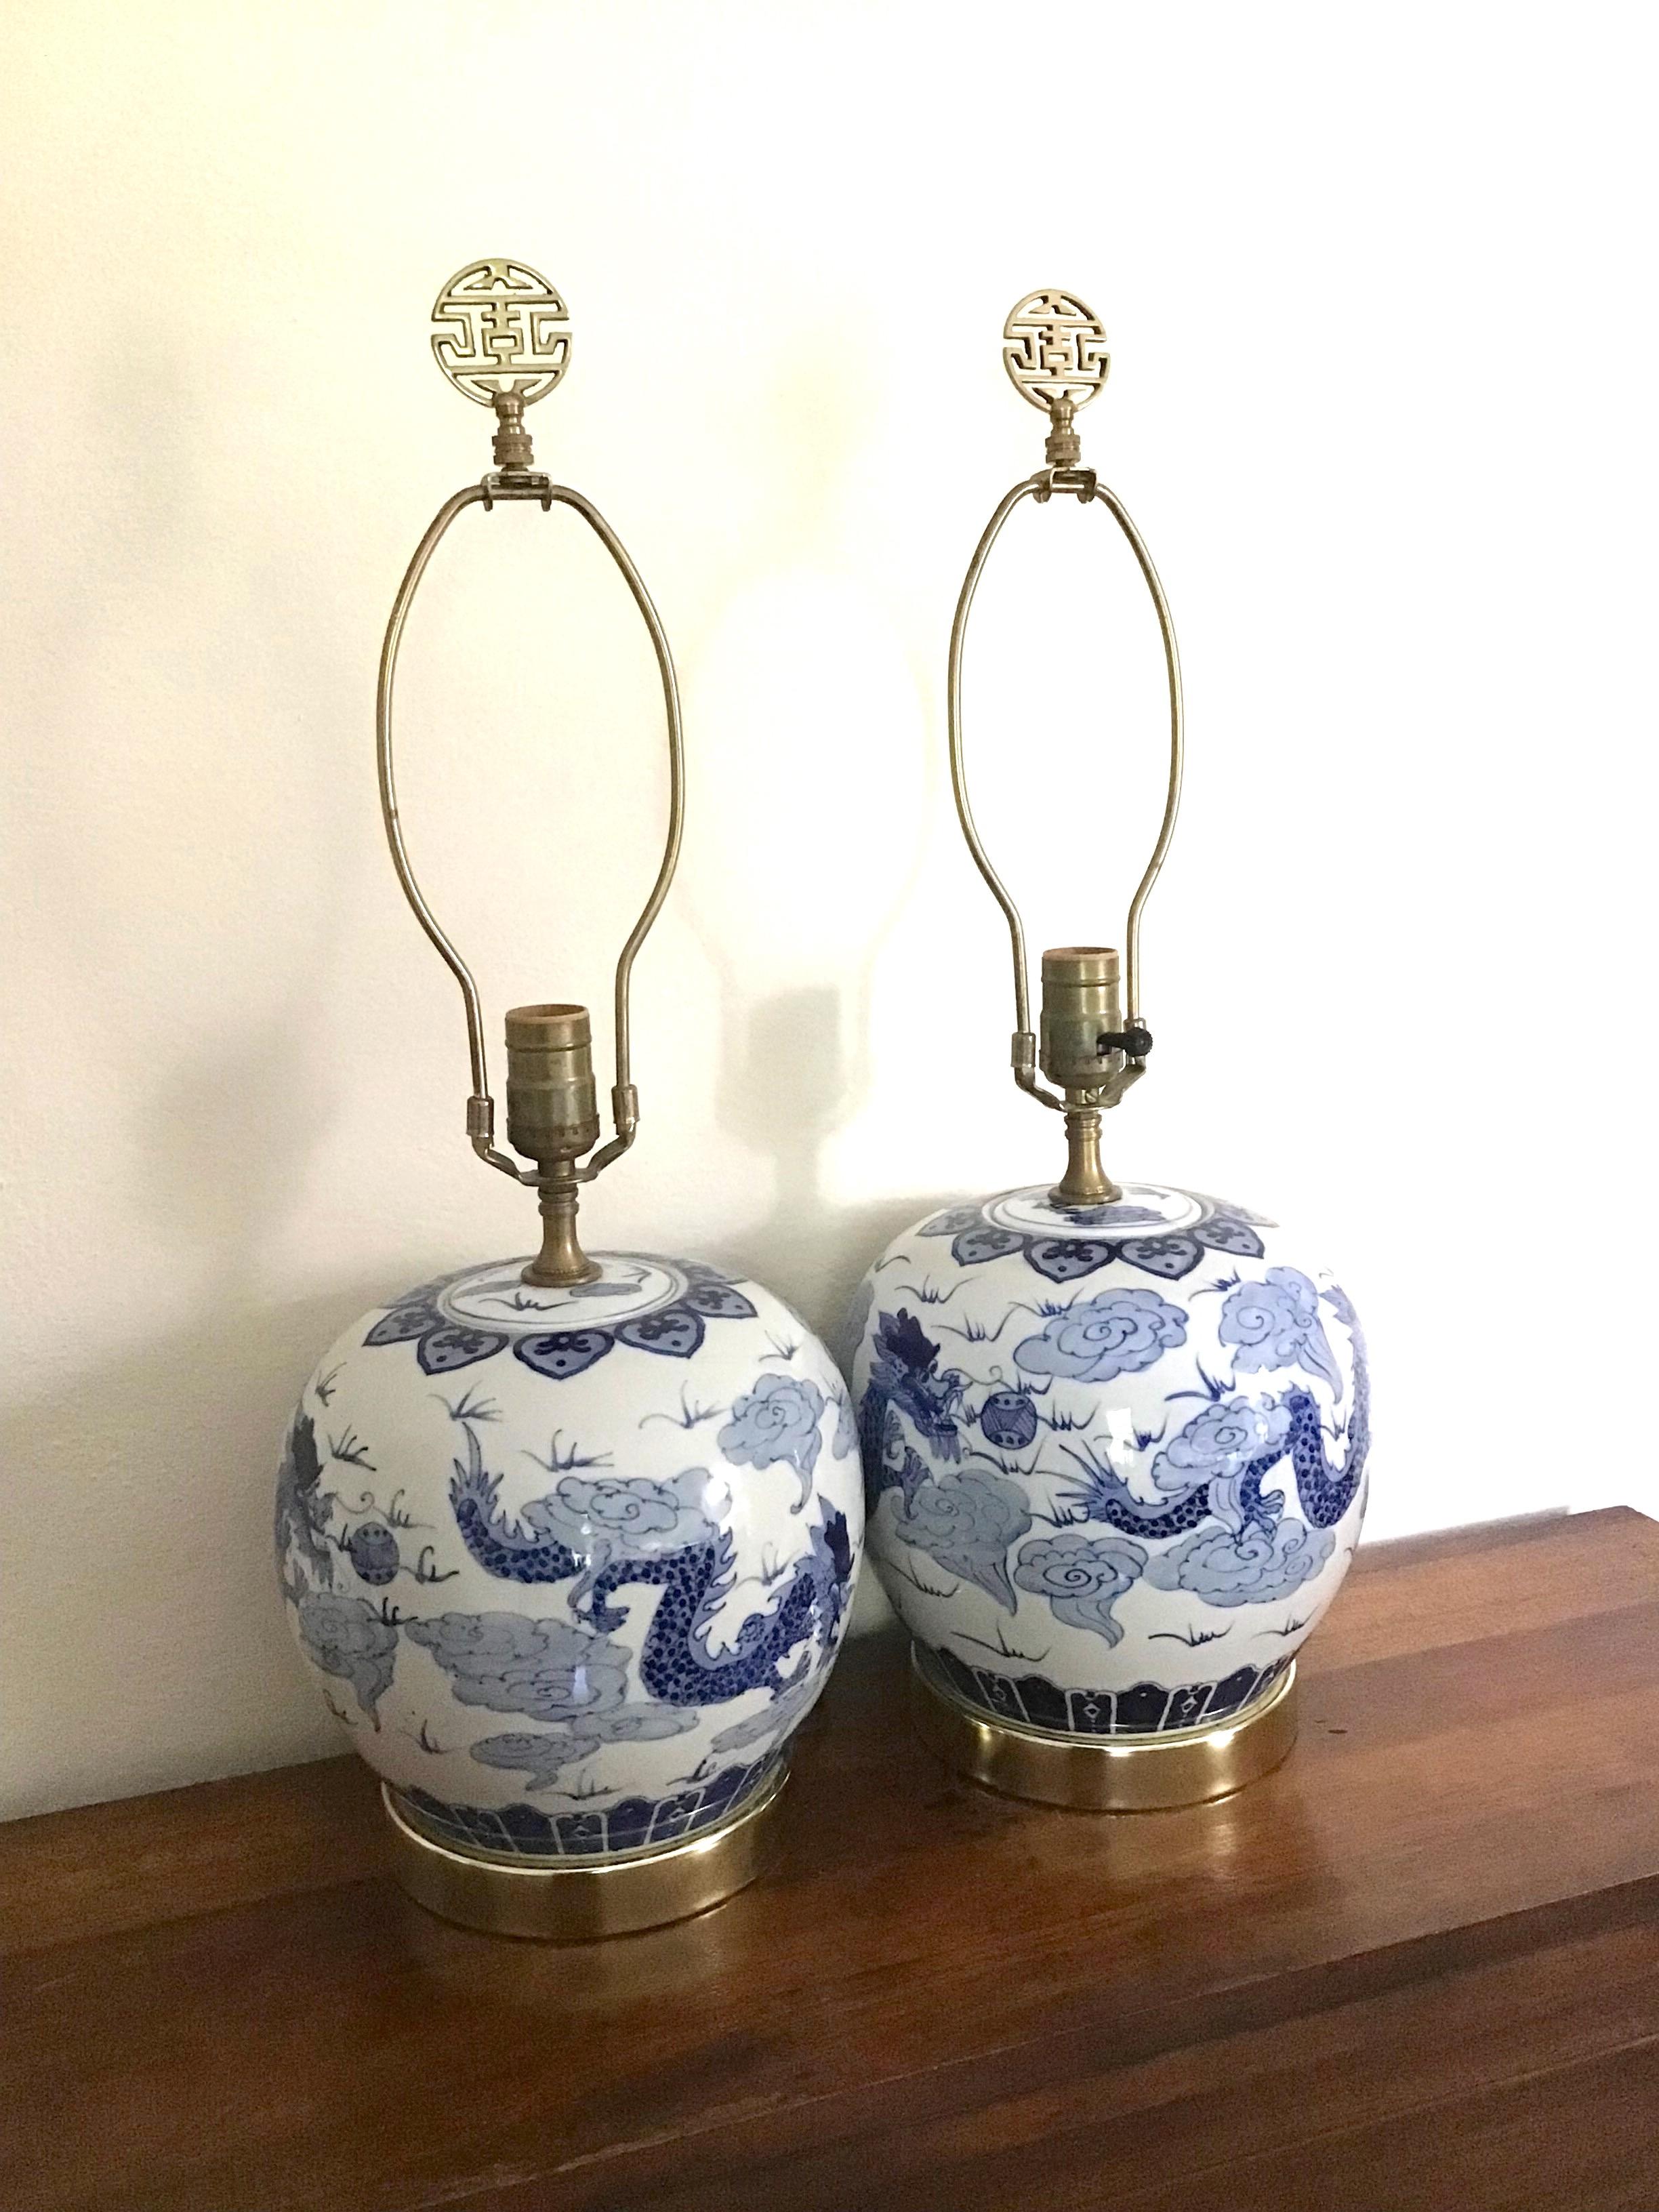 Lovely vintage ginger jar table lamps in blue and white with dragon motifs. These look to be from the 1970's from the hardware and cord.
They are in good vintage condition with no cracks to the porcelain.